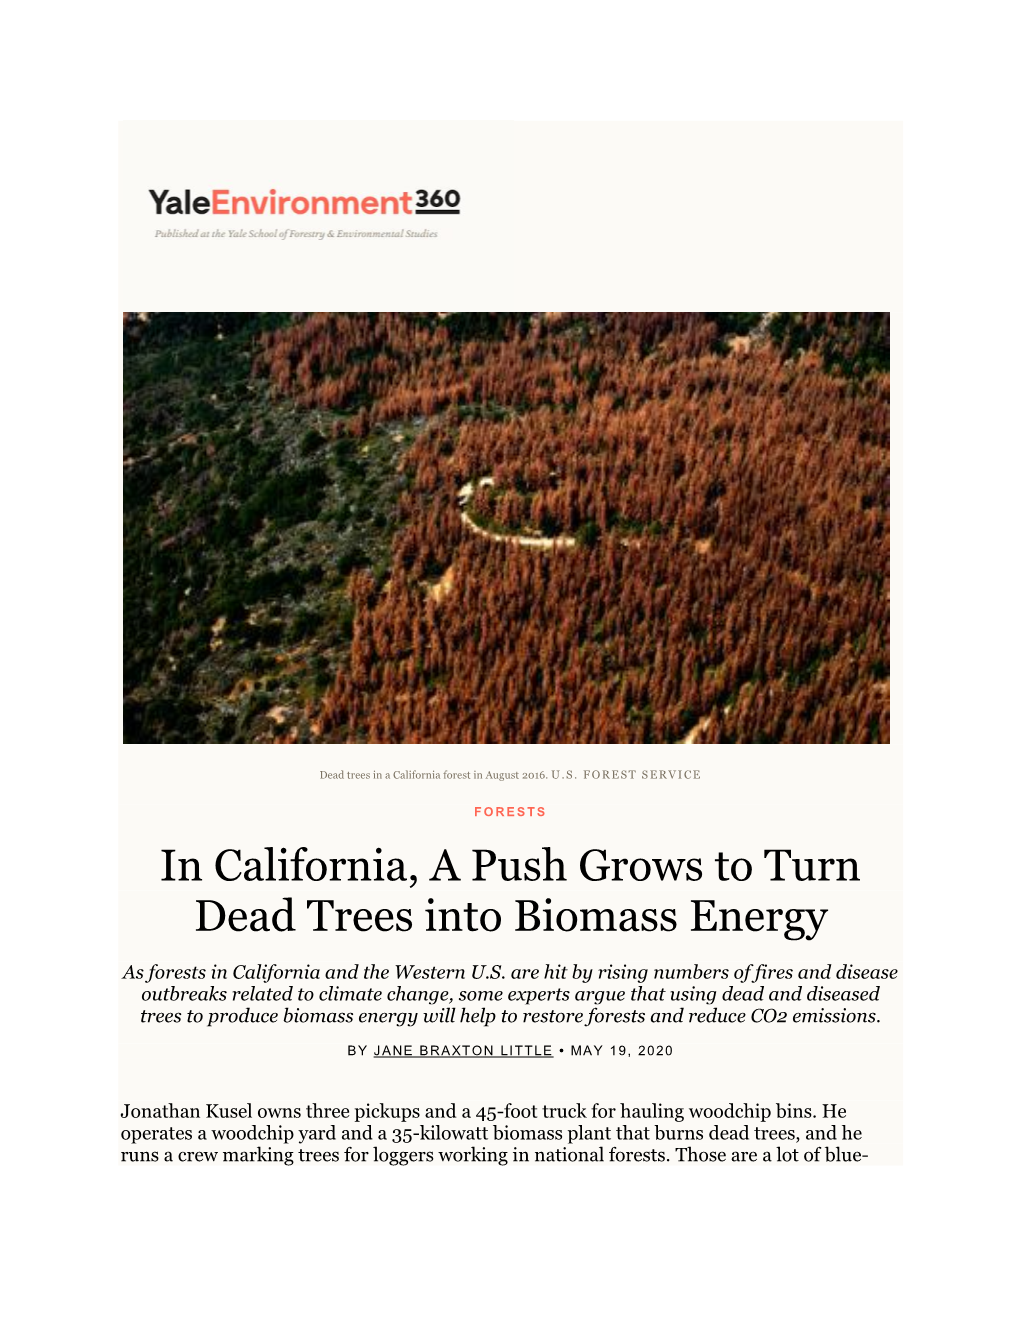 In California, a Push Grows to Turn Dead Trees Into Biomass Energy